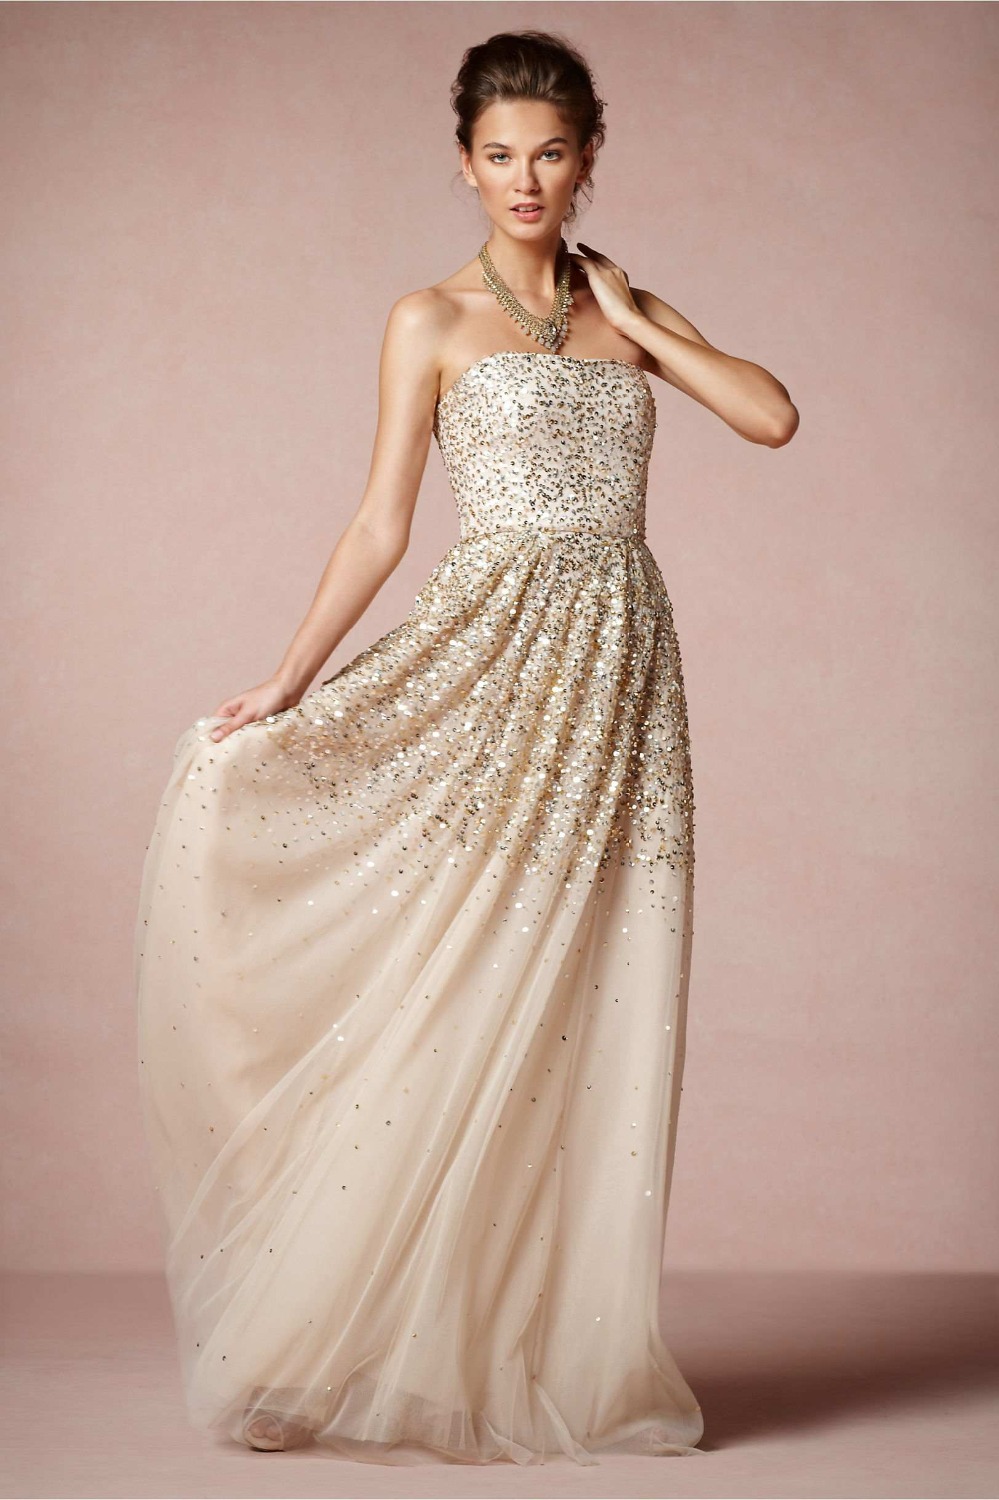 Champagne colored bridesmaid dresses with sleeves